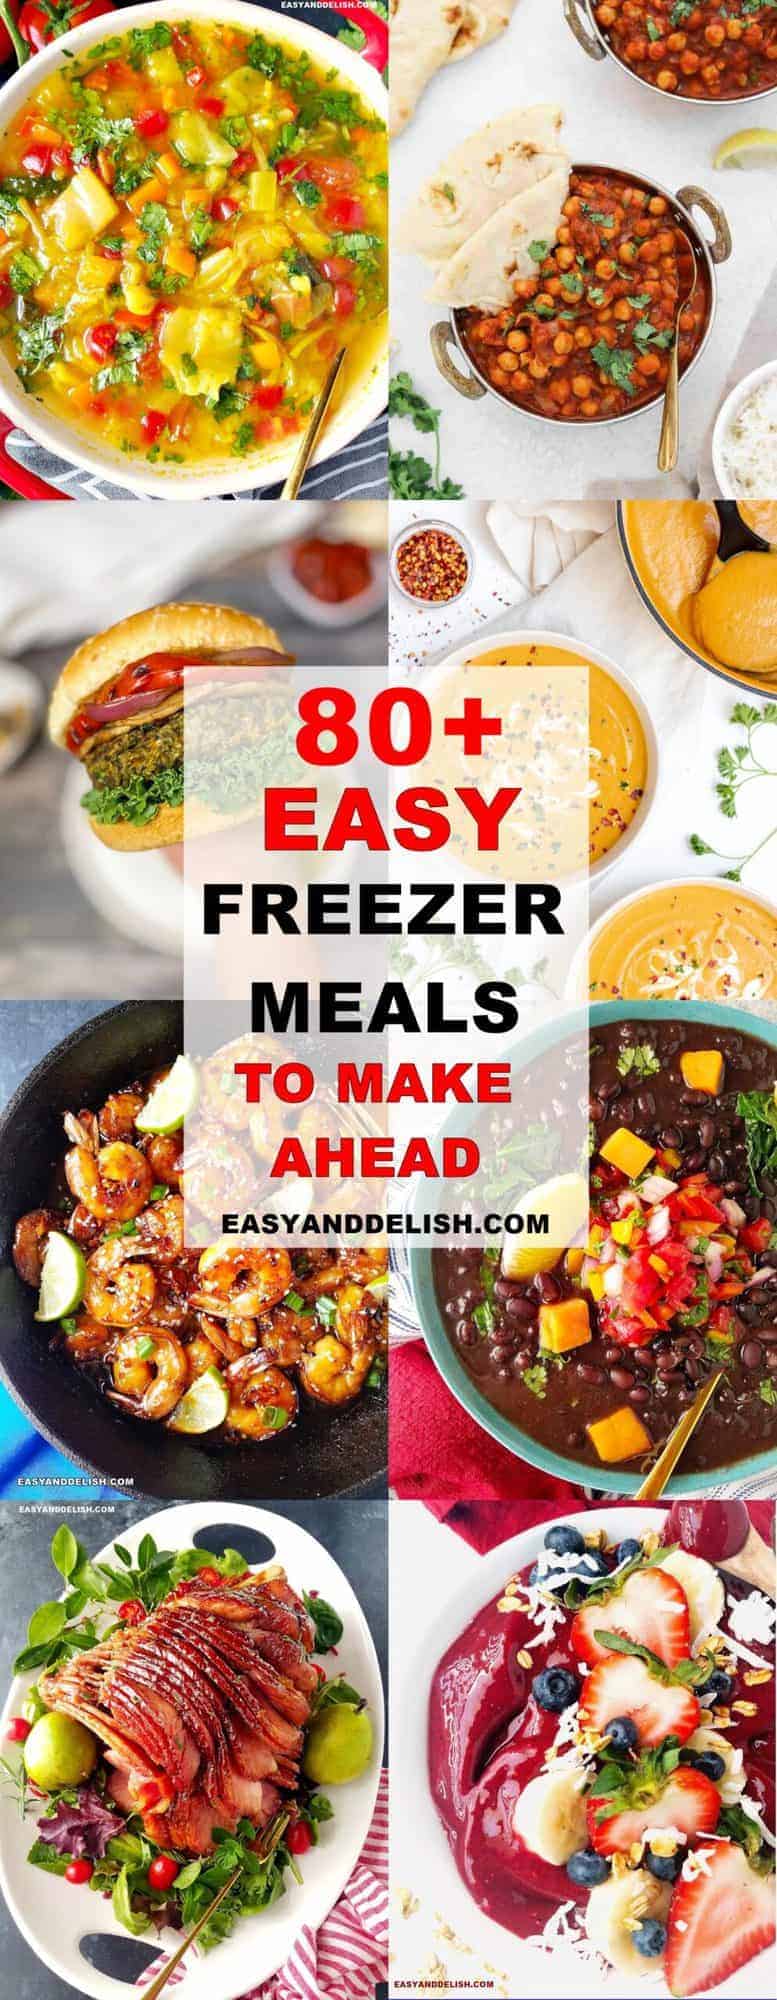 collage with more than 85 easy freezer meal recipes to make ahead